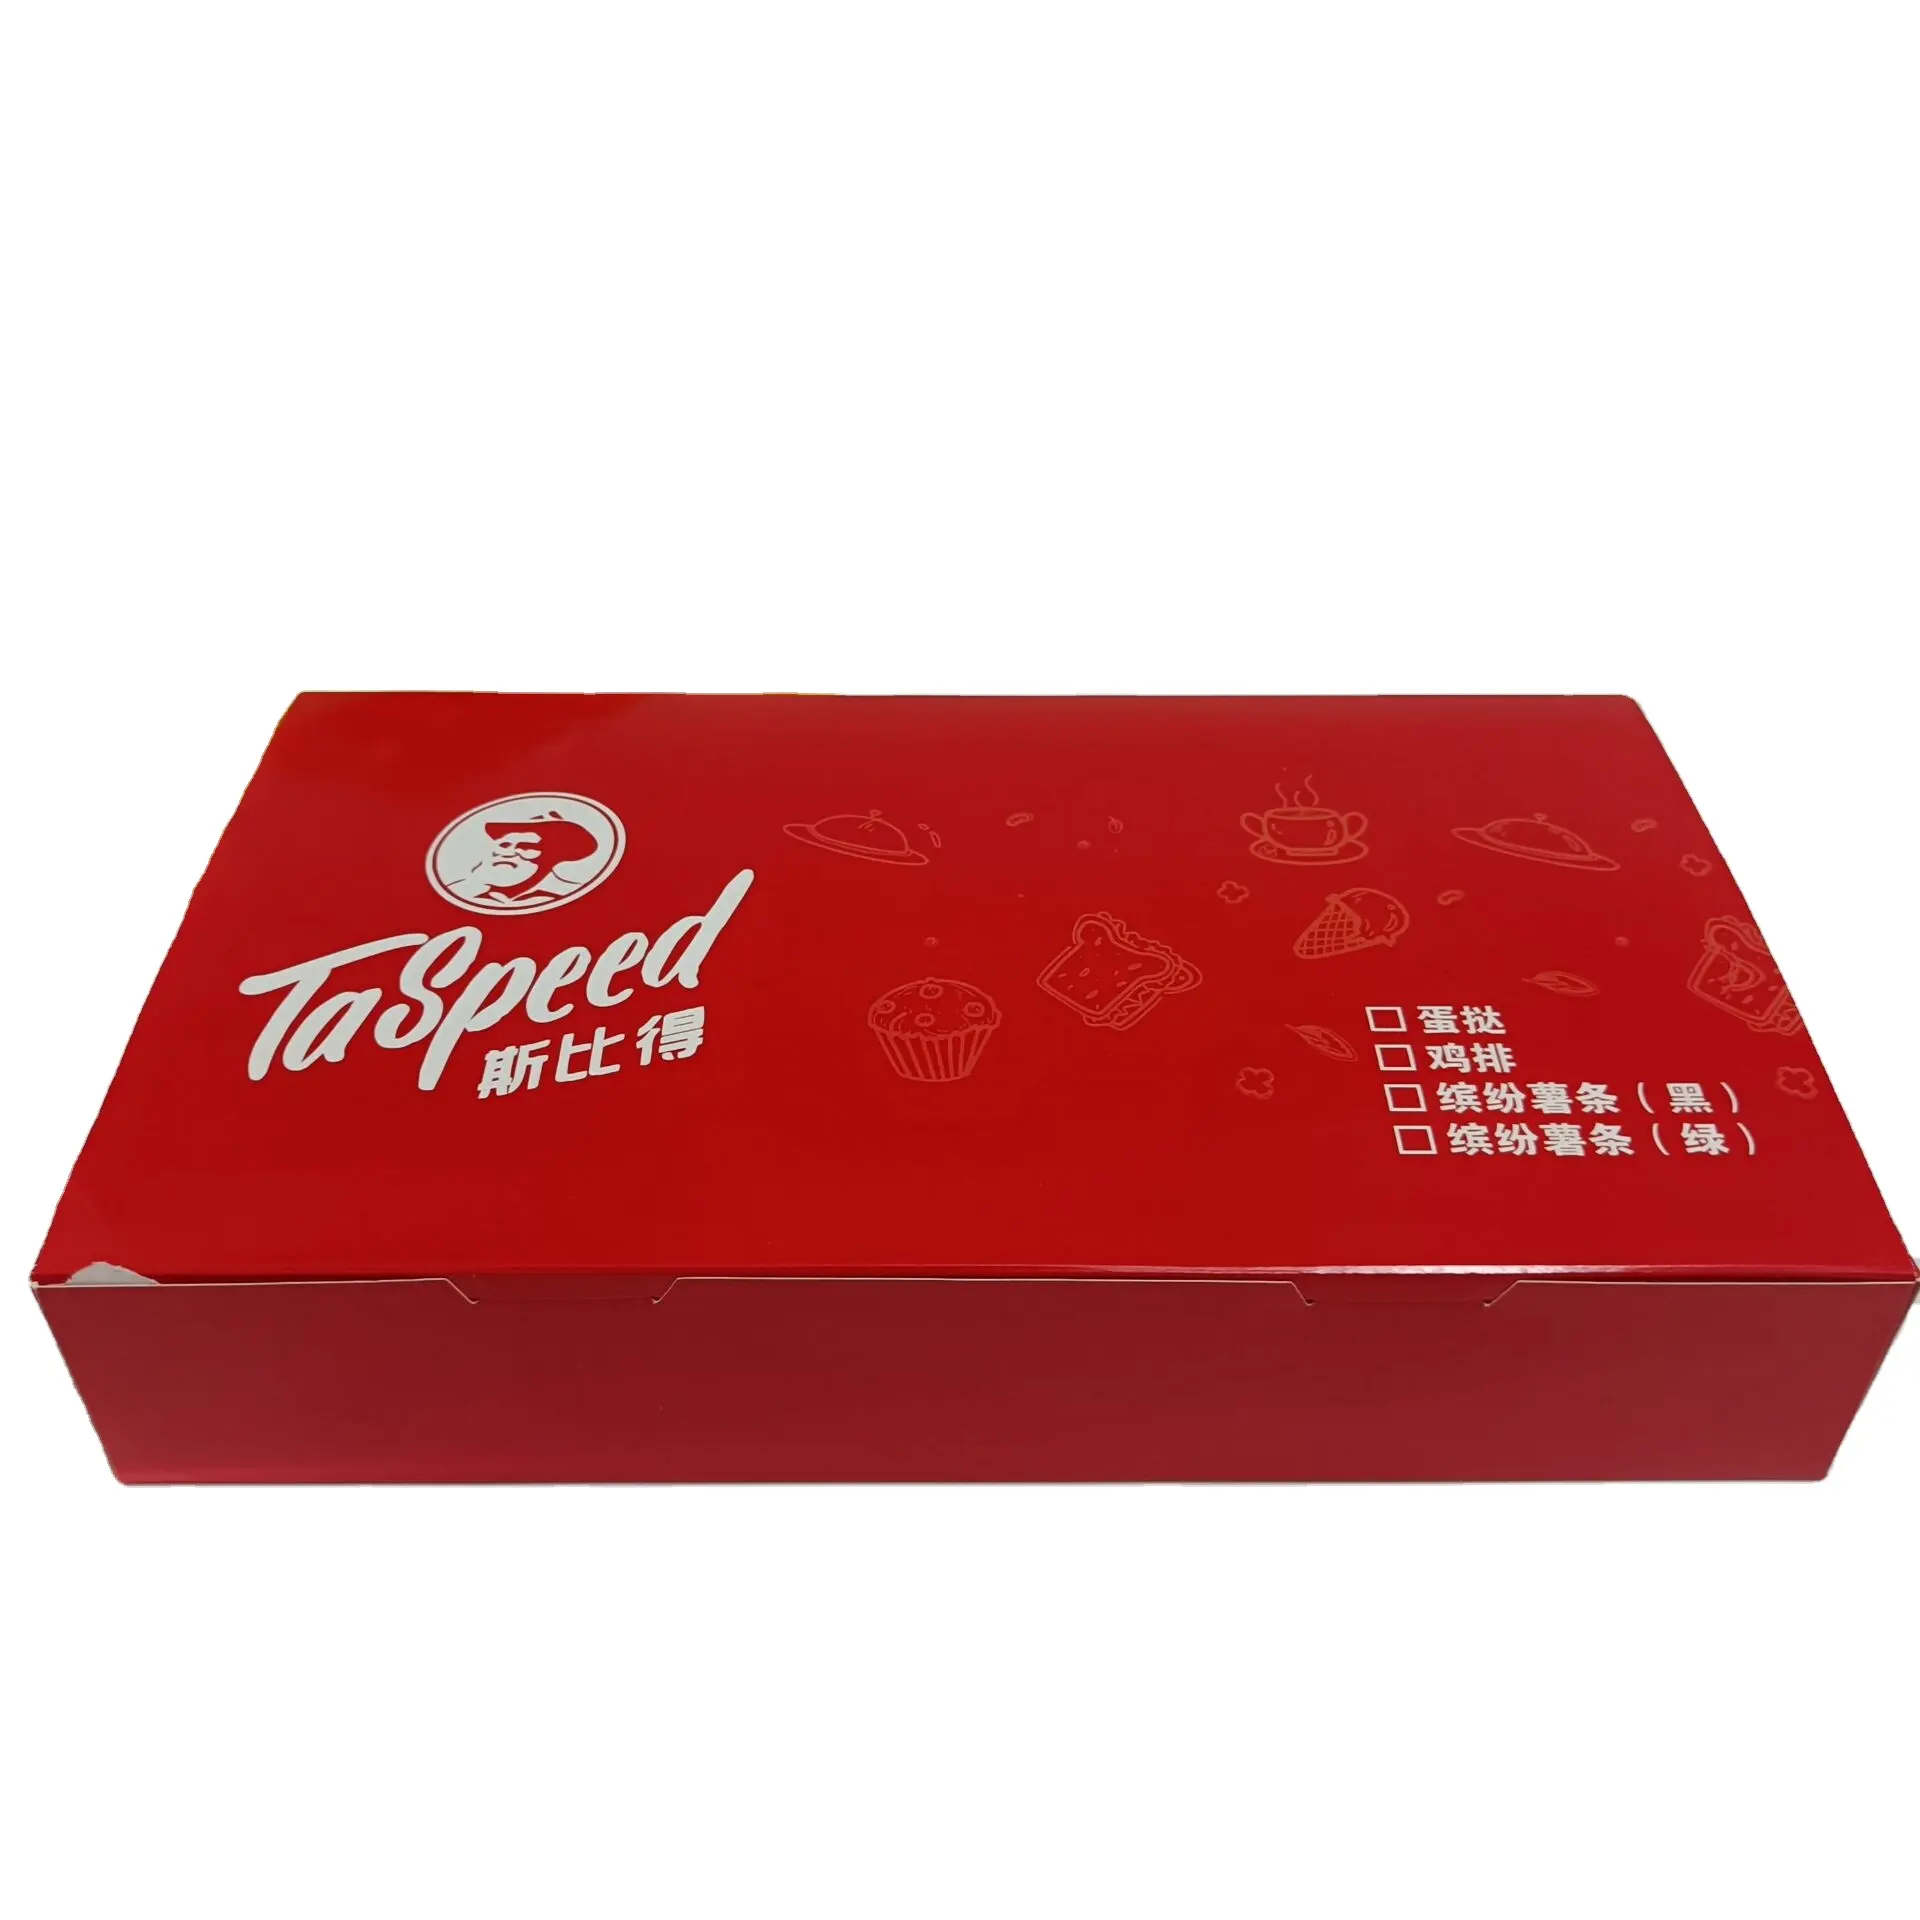 SP1909 Wholesale custard tarts, chicken cutlets, and French fries in cuboid red paperboard boxes with your logo